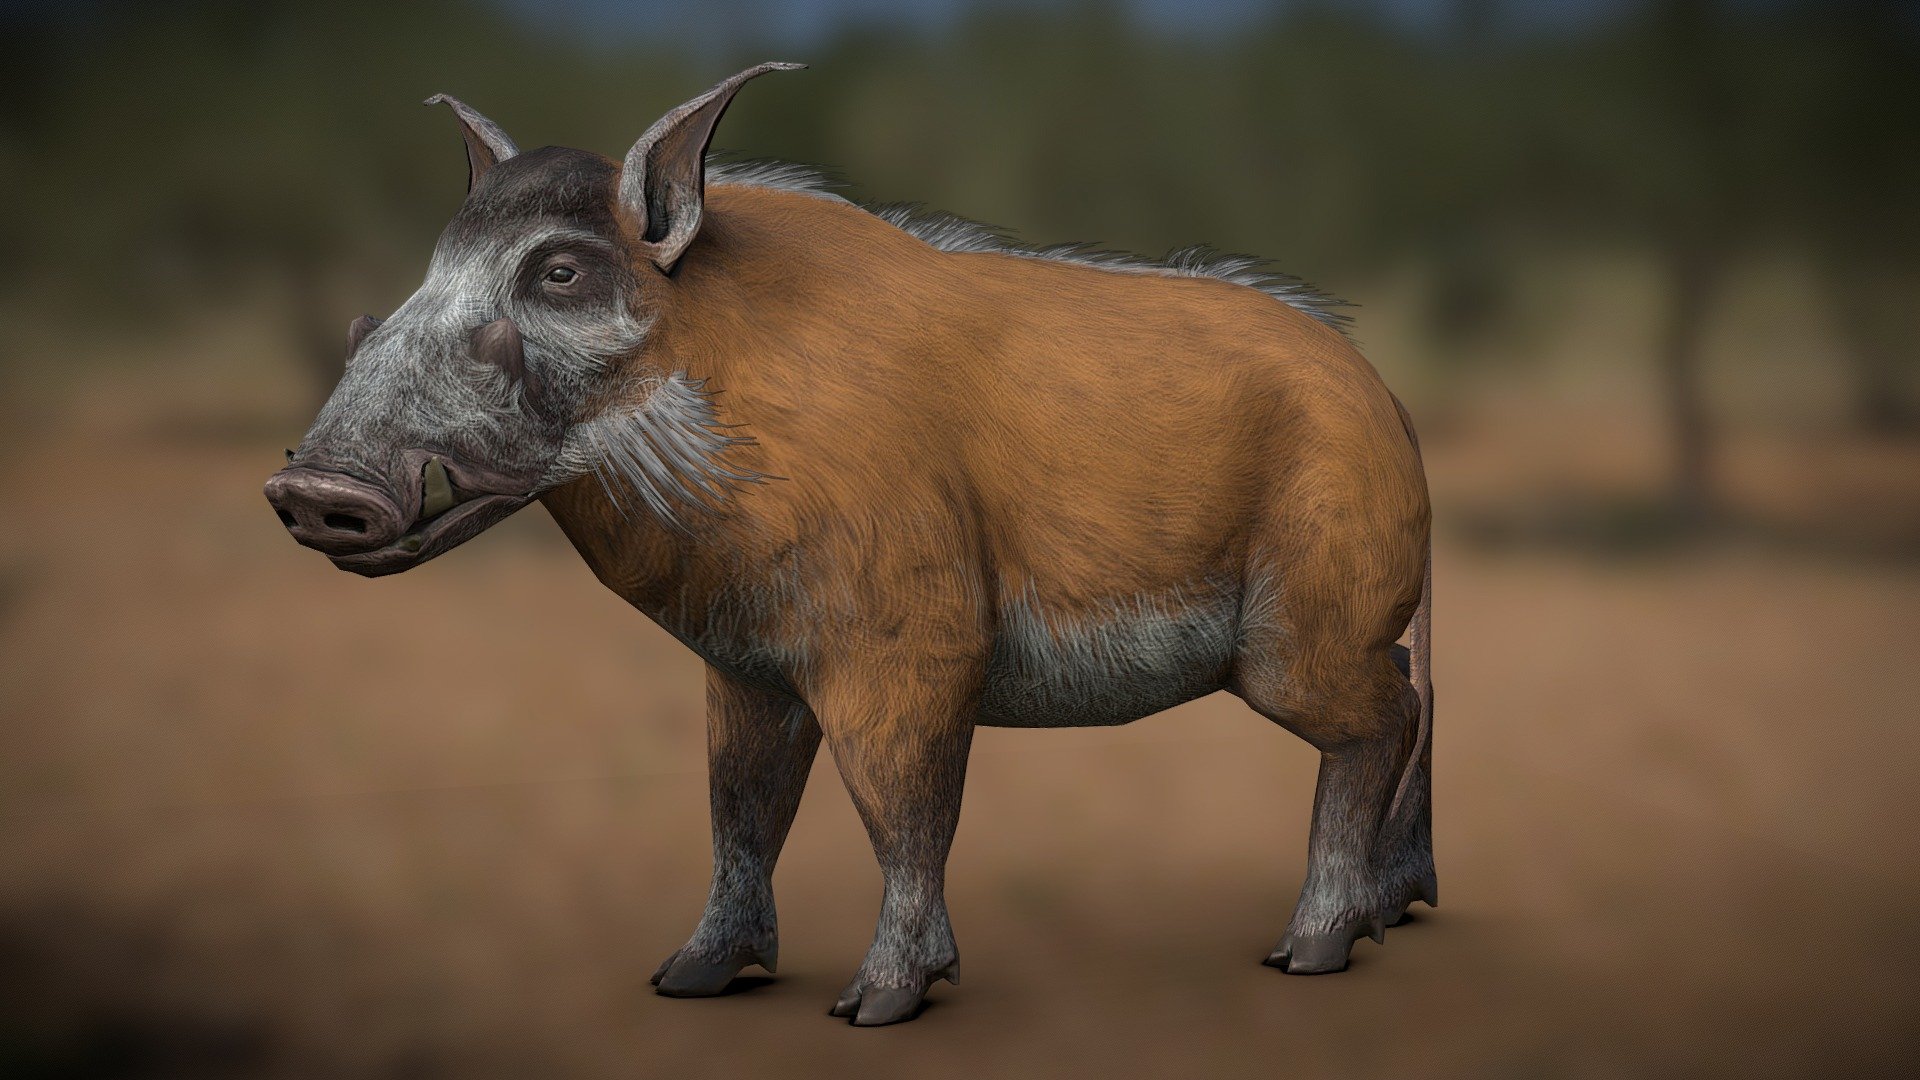 Red river hog (Potamochoerus porcus) was made for the mobile game Wild Hunt for Ten Square Games. 
Sculpture, retopology and uv-mapping made in Blender, textures in Substance Painter and Photoshop - Red river hog (Potamochoerus porcus) - 3D model by 3dbogi 3d model